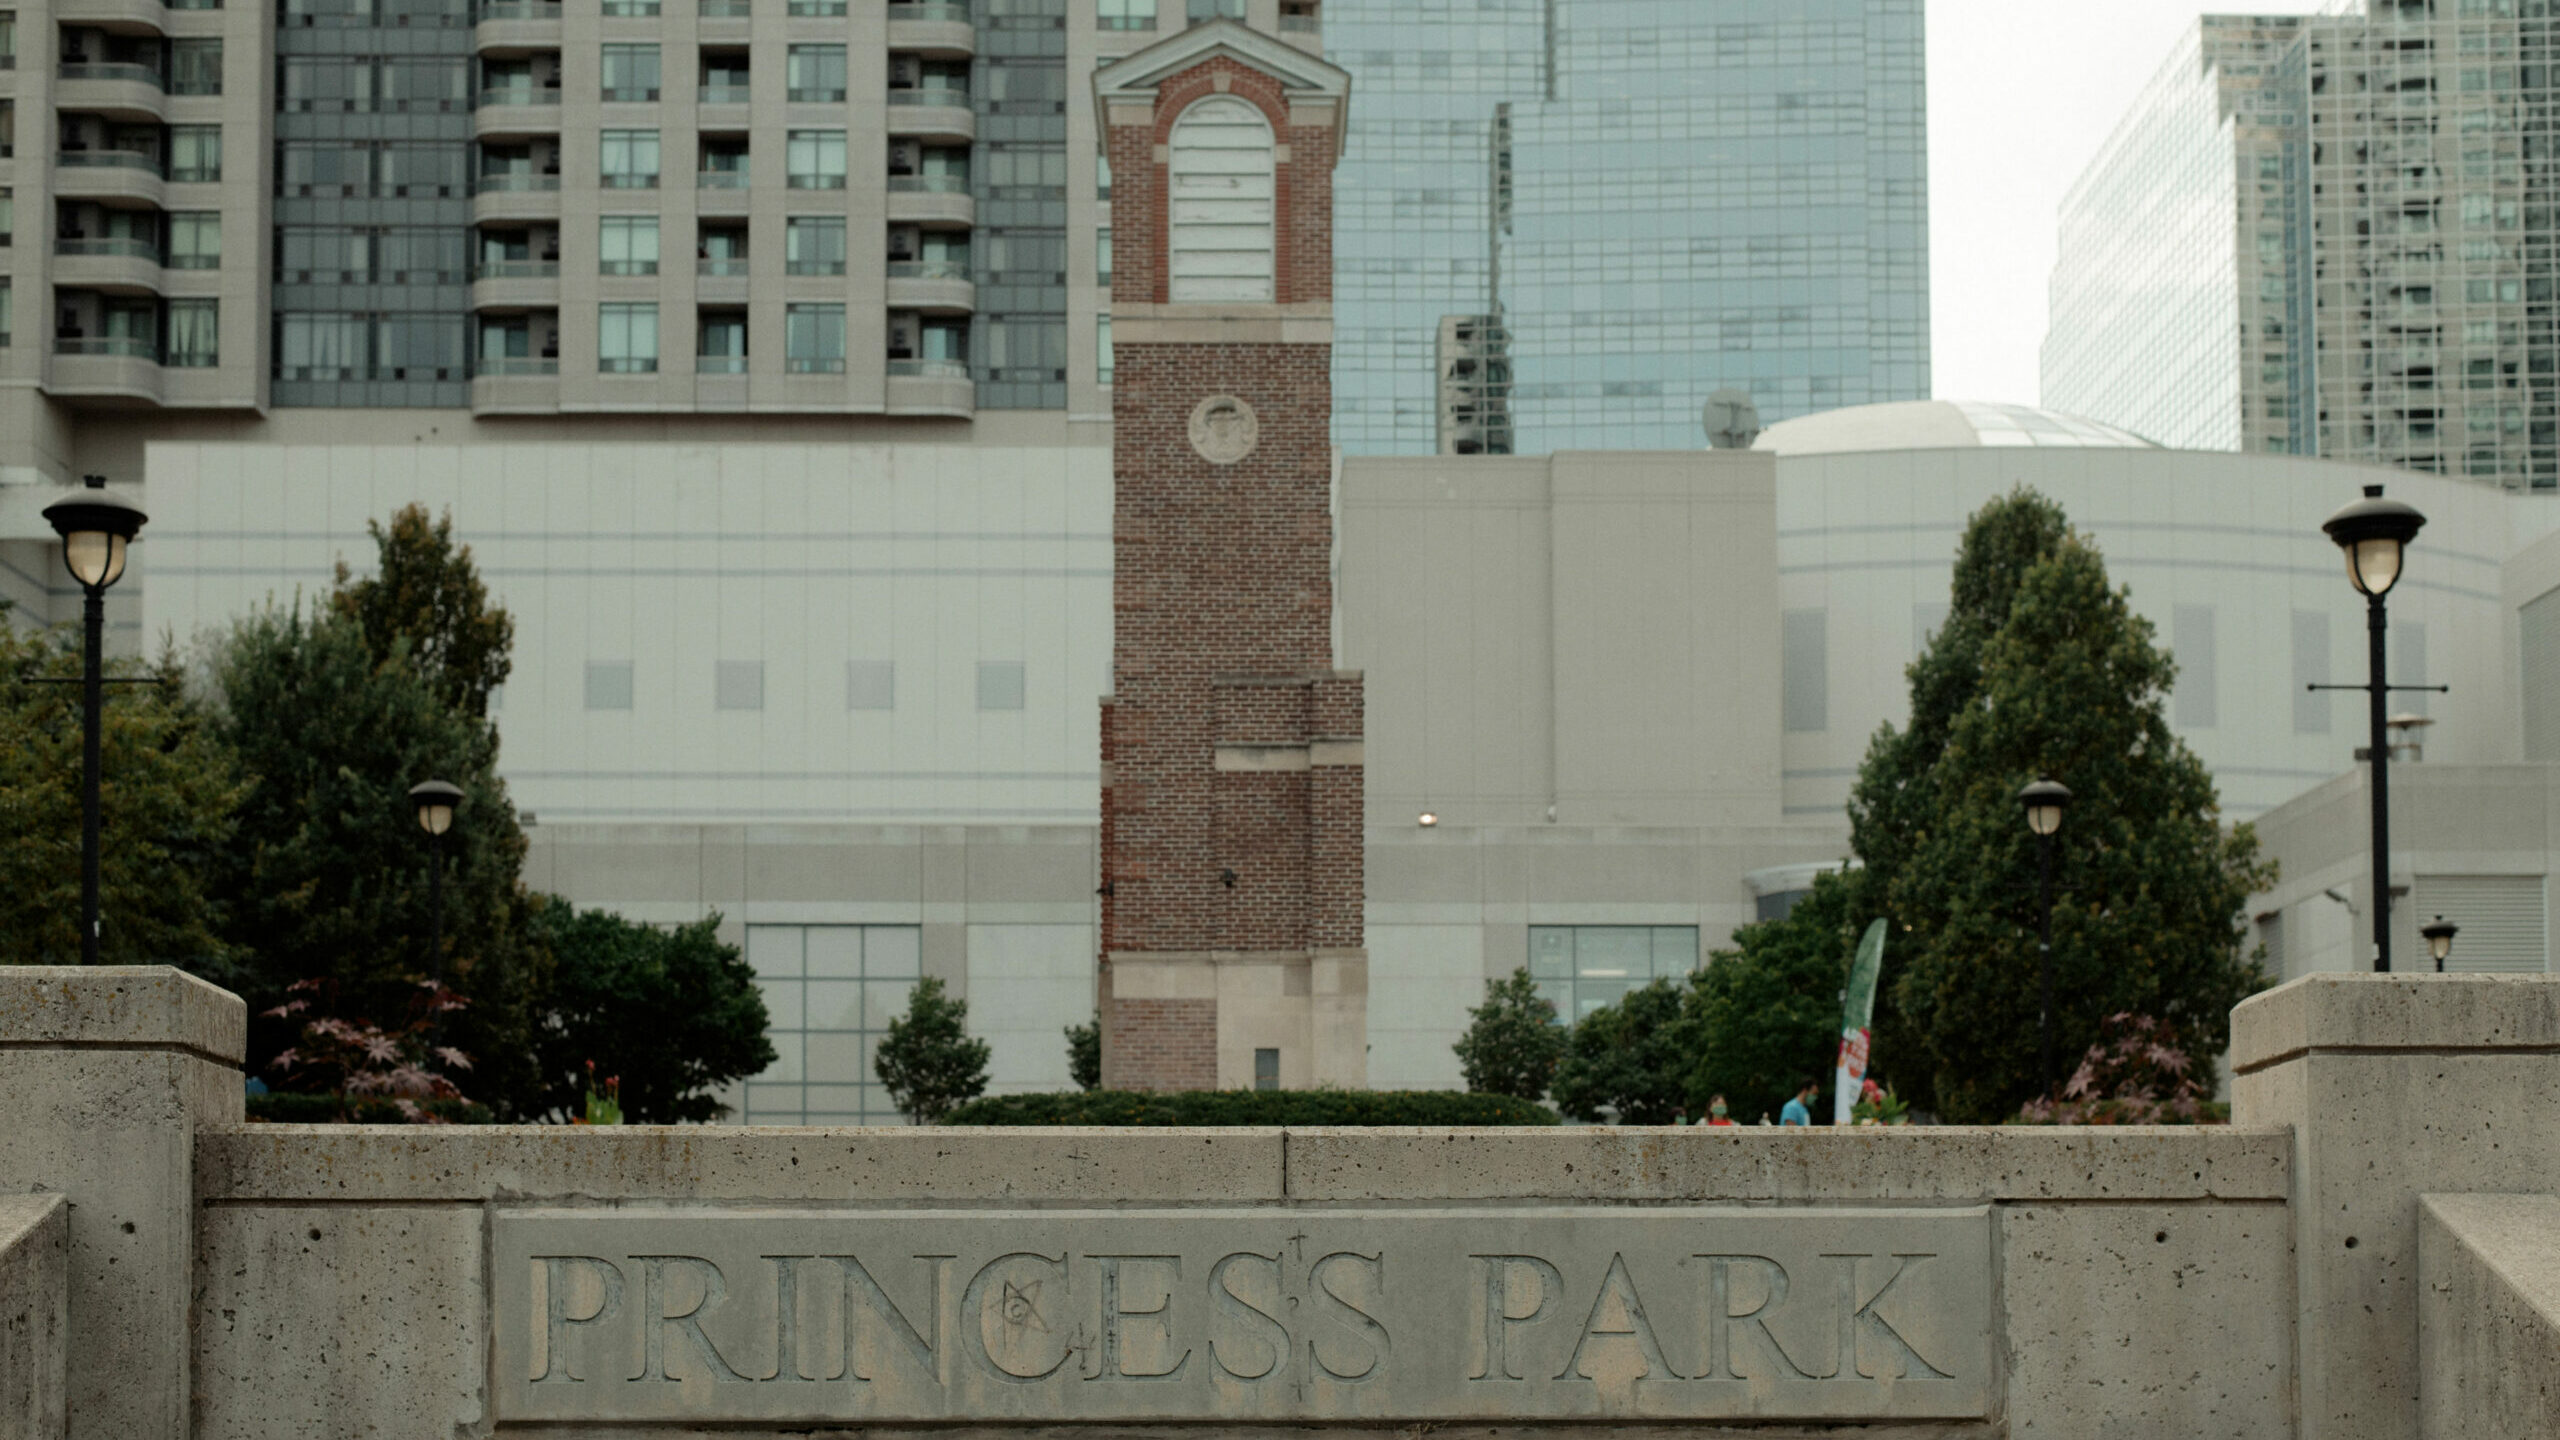 A large stone tower against a background of buildings. A stone sign in front reads "Princess Park".